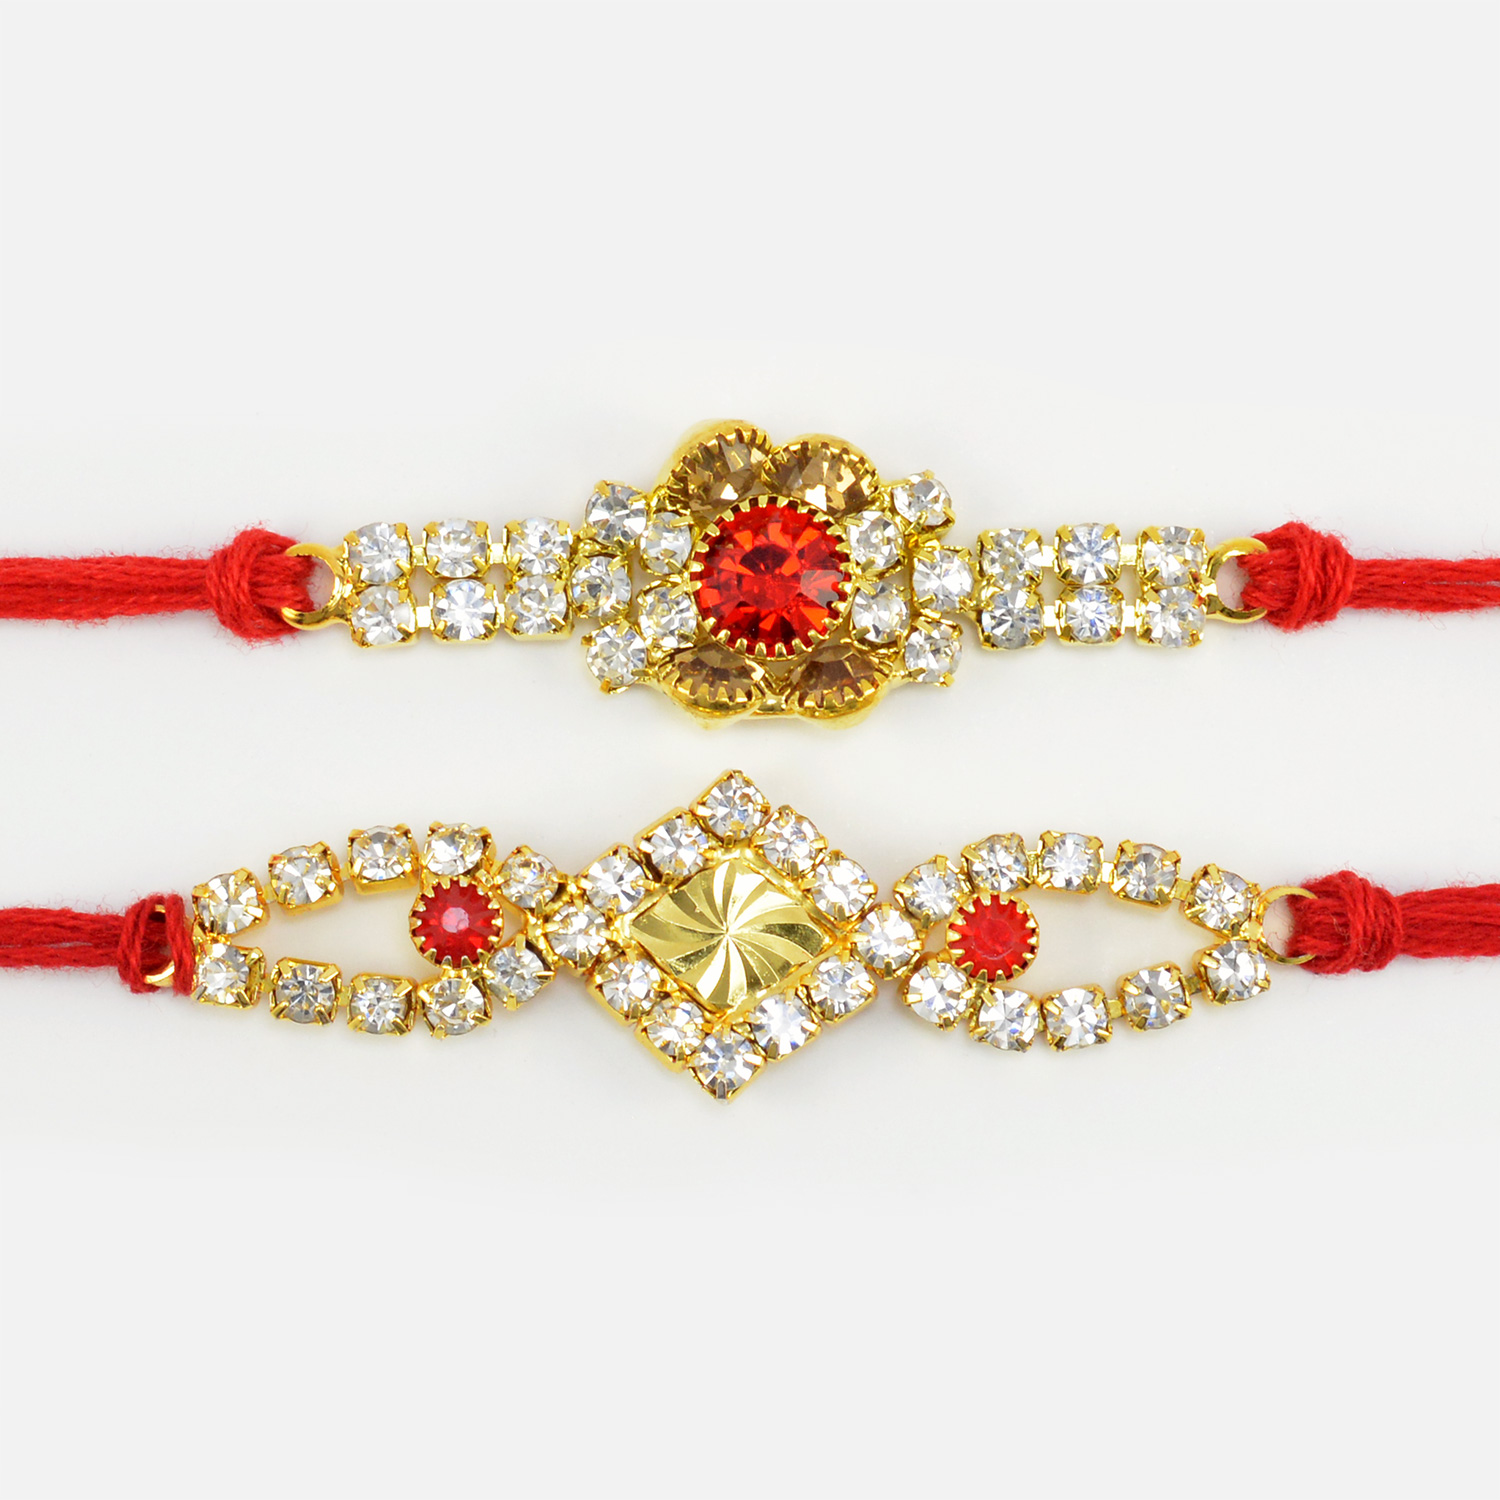 Amazing Design Jewel Studded Attractive Pattern of Two Awesome Rakhis Set